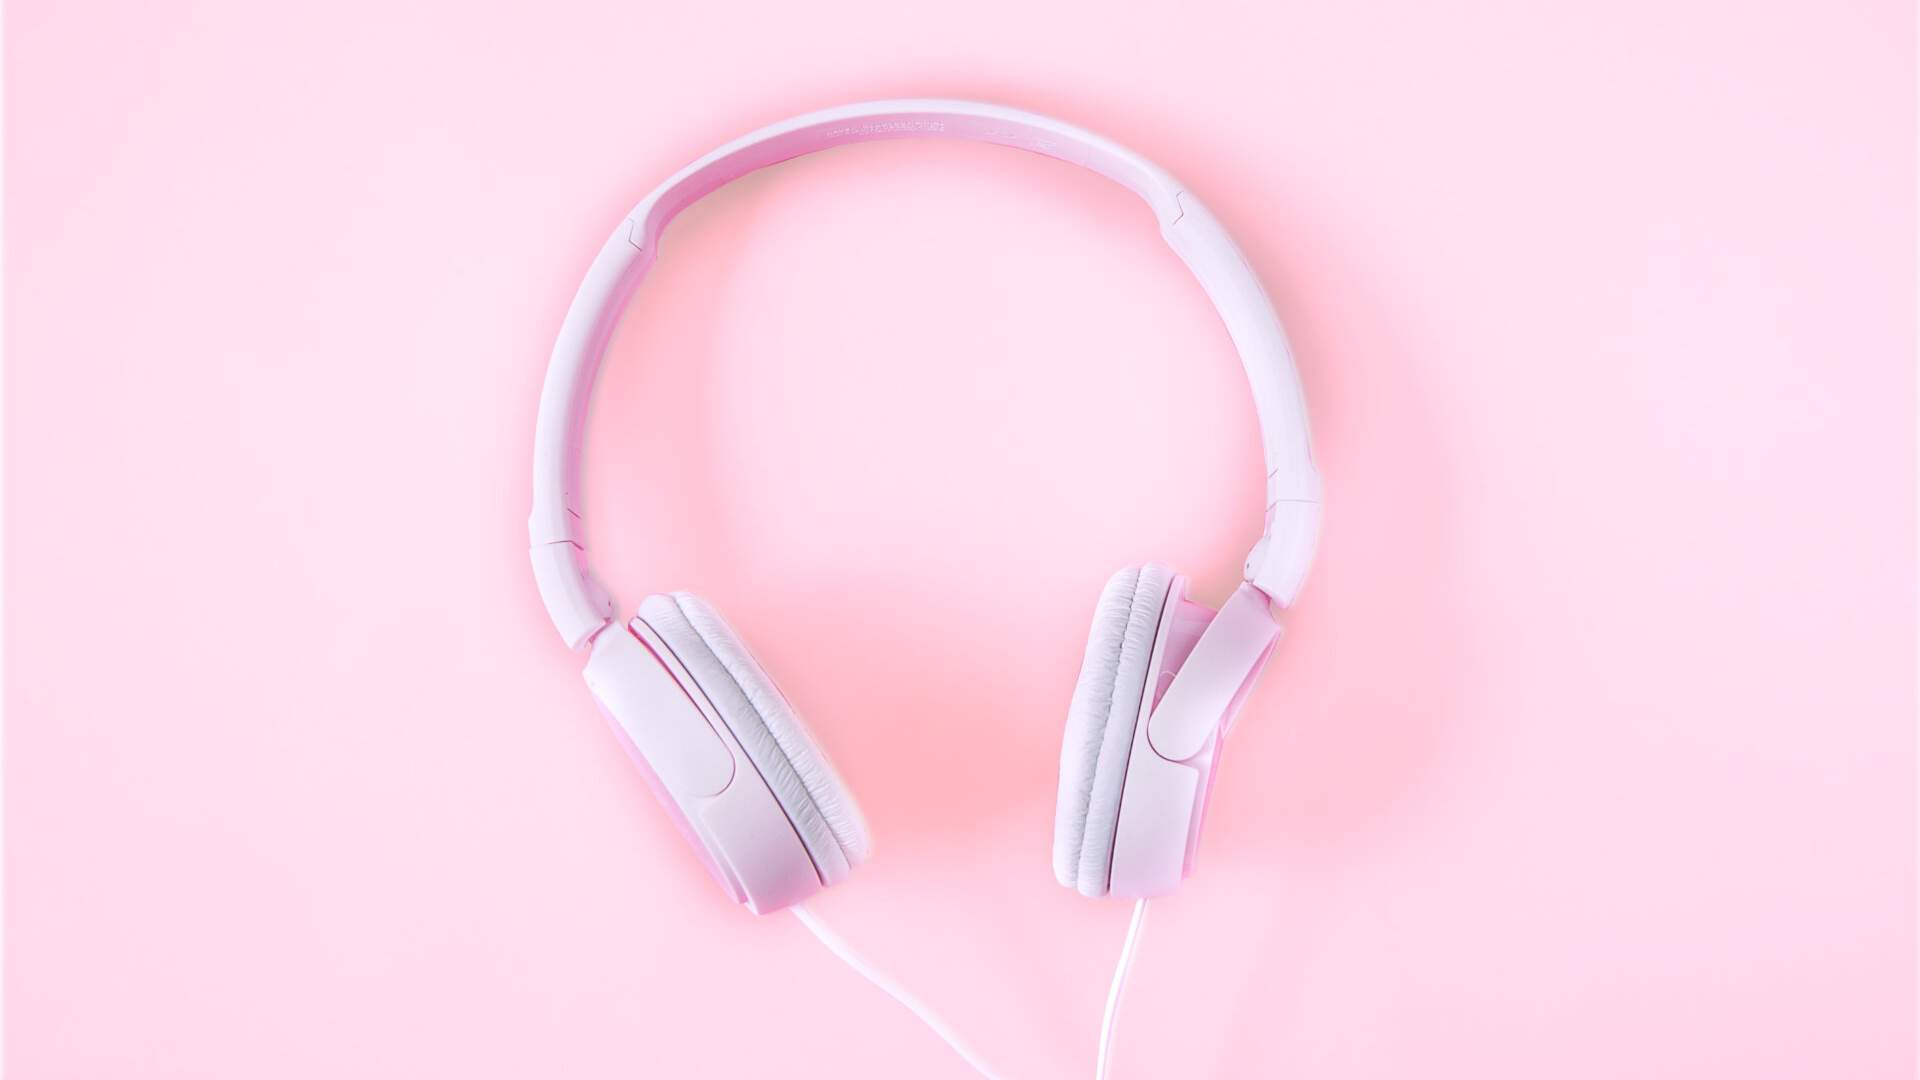 pink headphones against a pink background